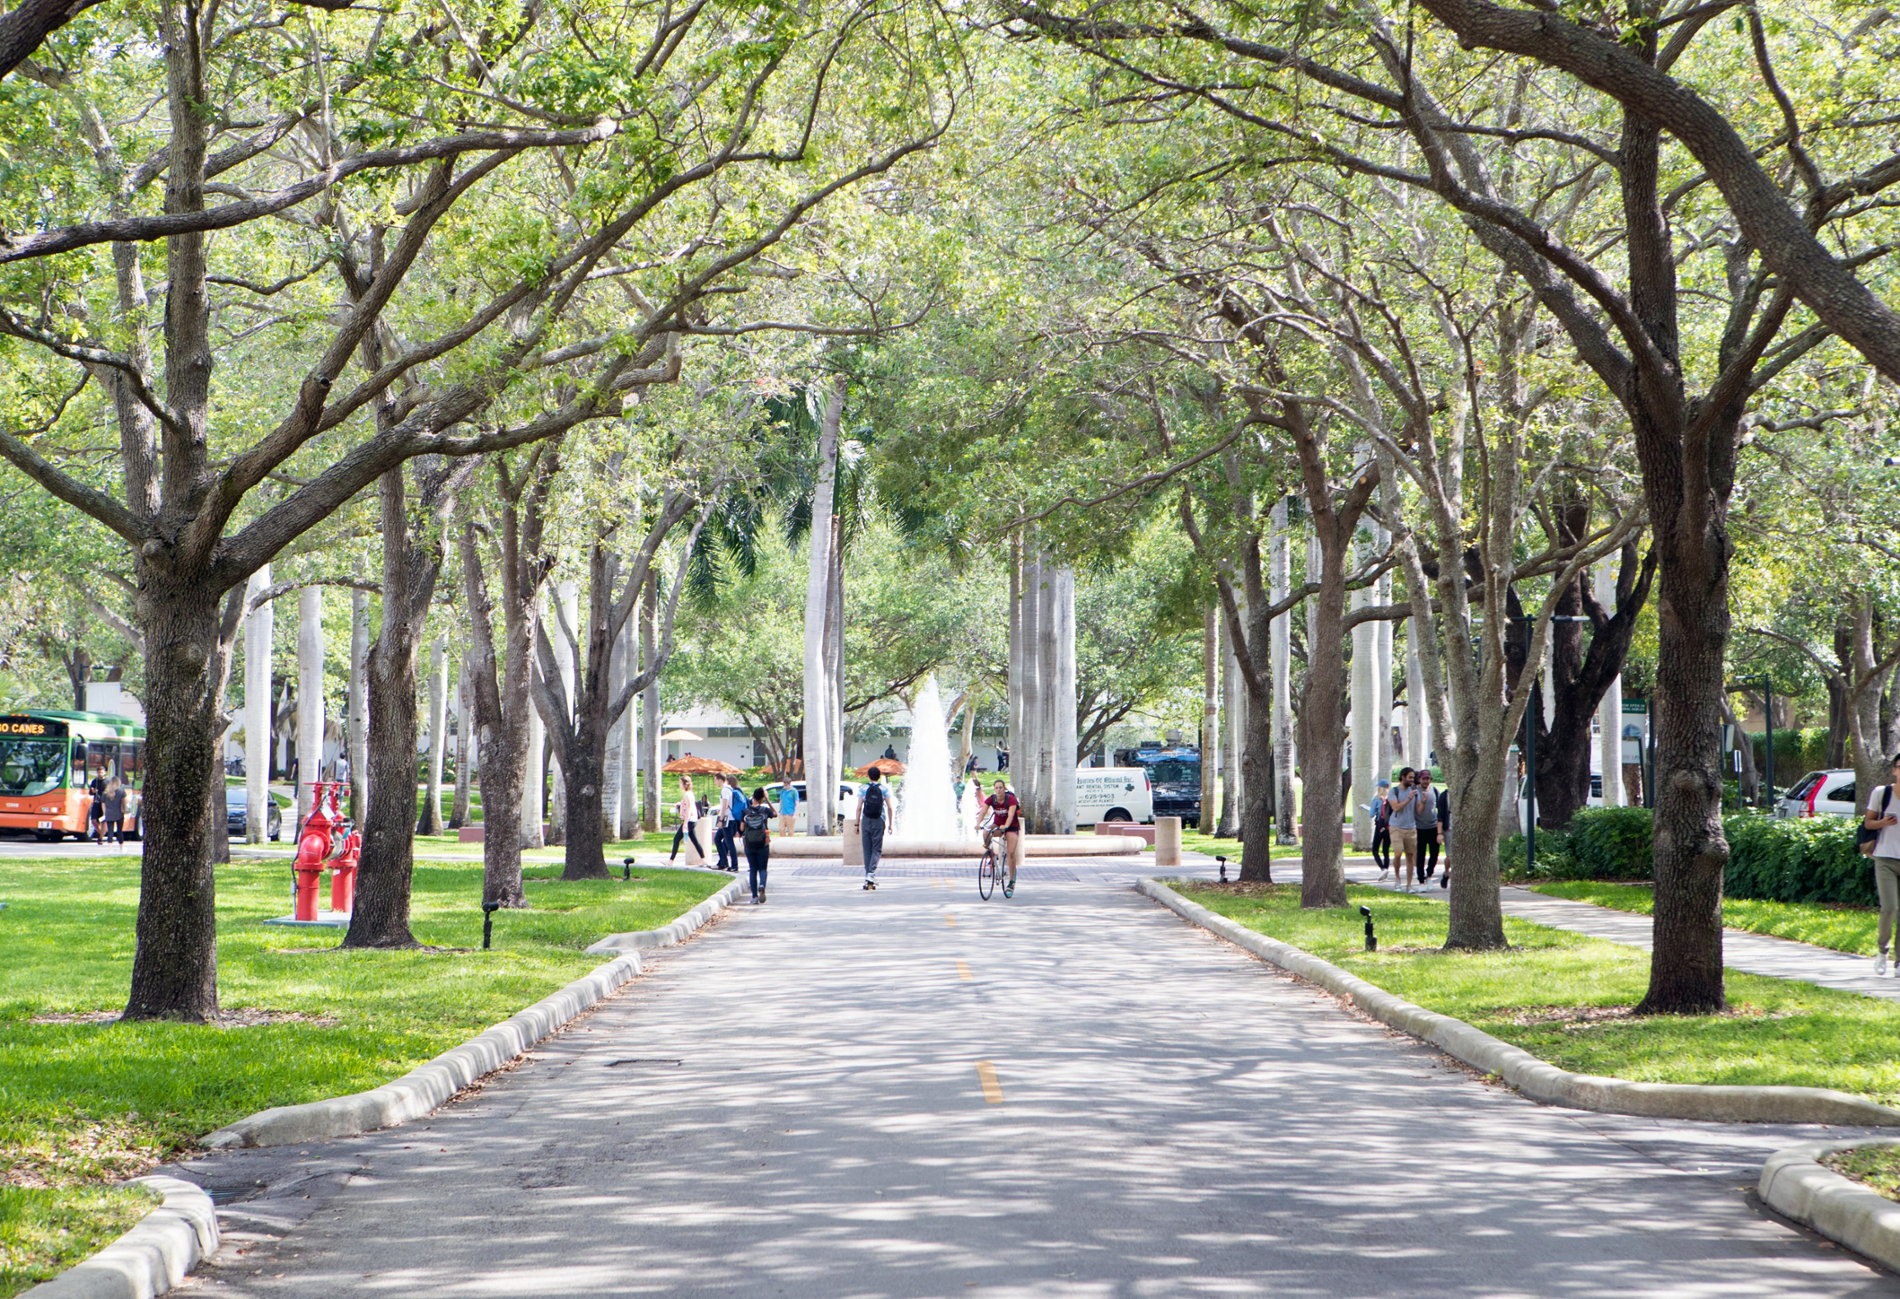 Tree lined street on the University of Miami Campus with students walking about.